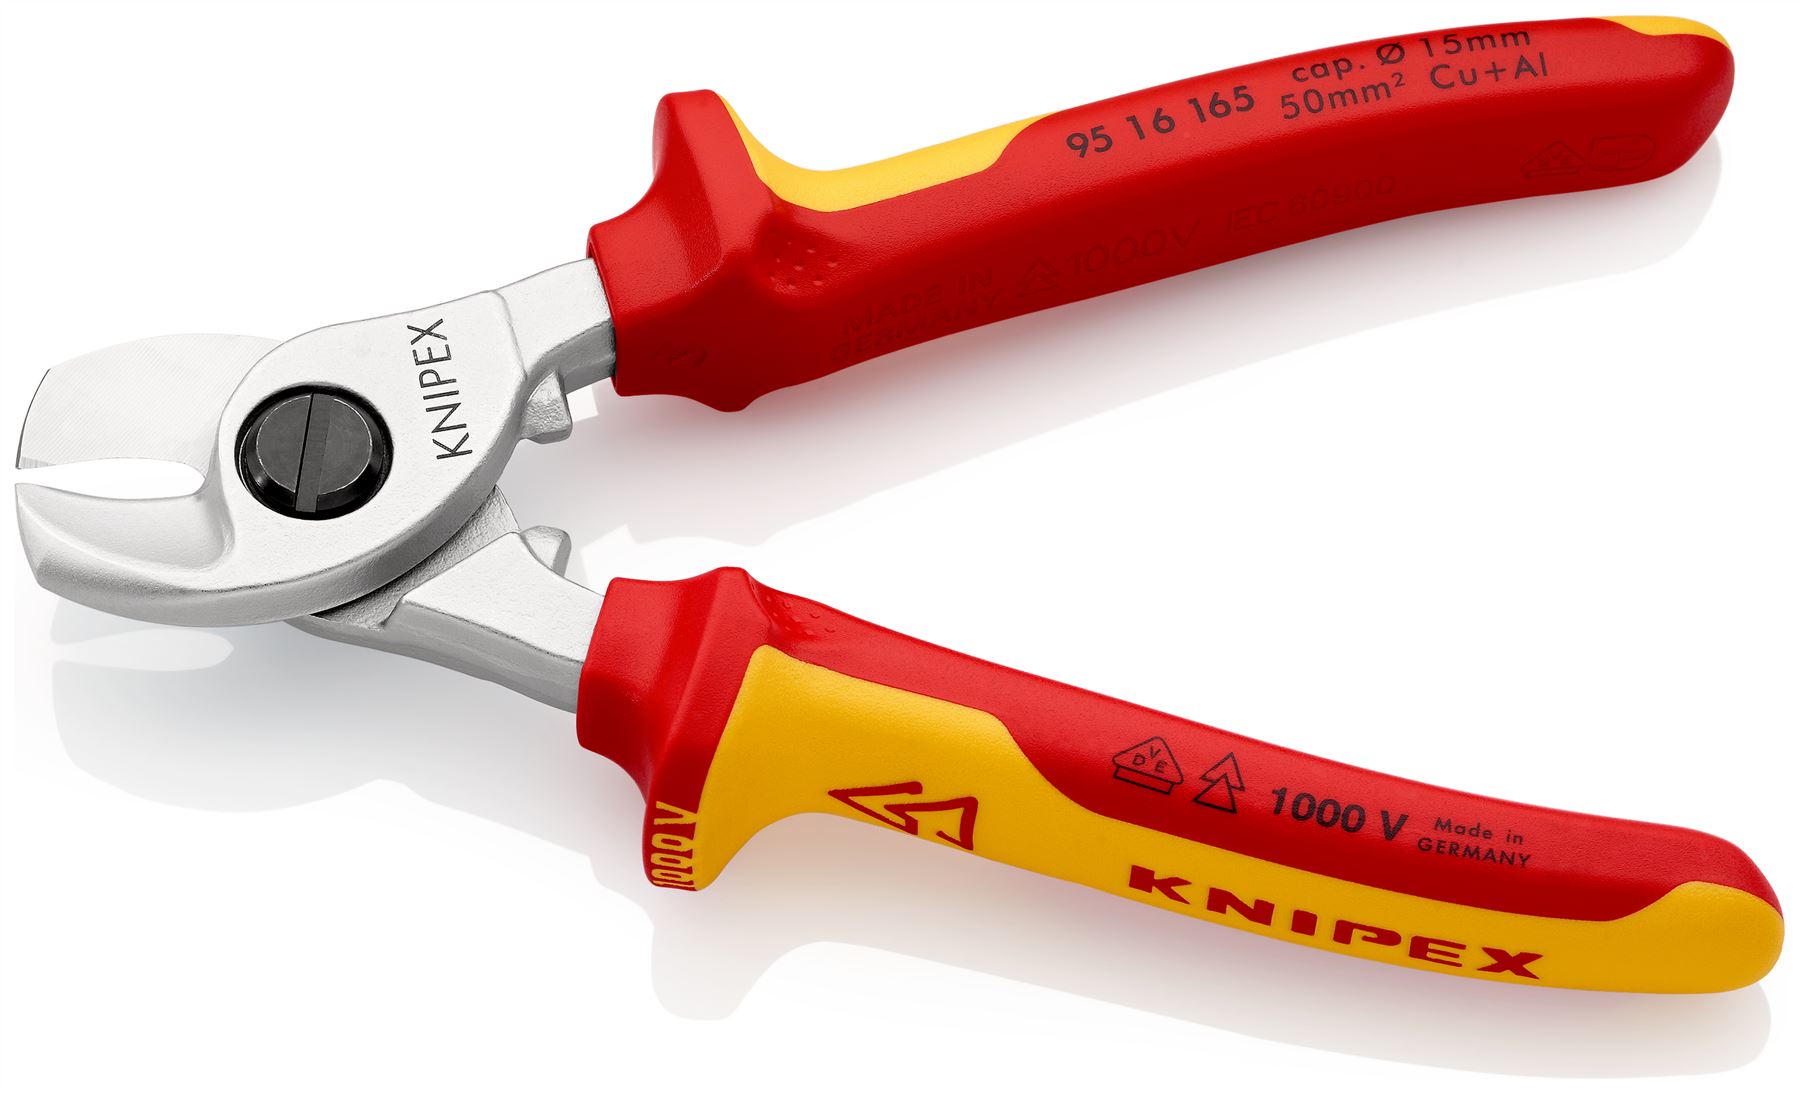 KNIPEX Cable Shears Cutting Pliers Cuts Cable up to 15mm Diameter 165mm VDE Insulated Multi Component Grips 95 16 165 SB